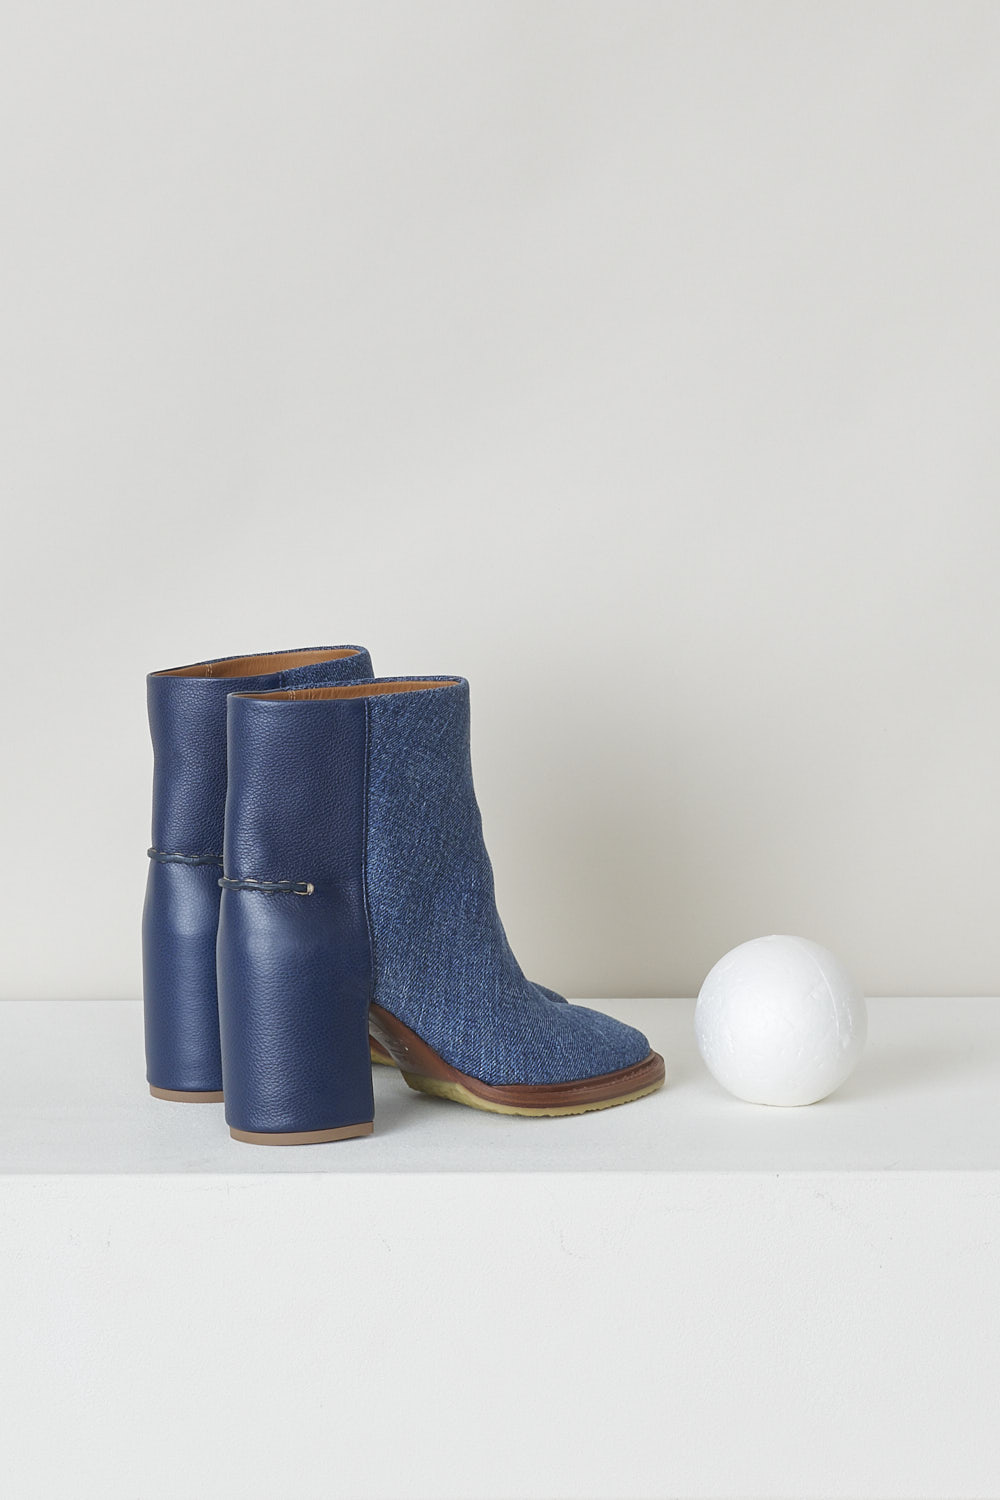 CHLOÃ‰, NAVY BLUE DENIM ANKLE BOOTS, CHC22S521X145C, Blue, Back, These dark navy denim slip-on ankle boots have a blue leather-clad block heel with white stitching on the ankle. The boots have a round toe and a contrasting brown sole. 

